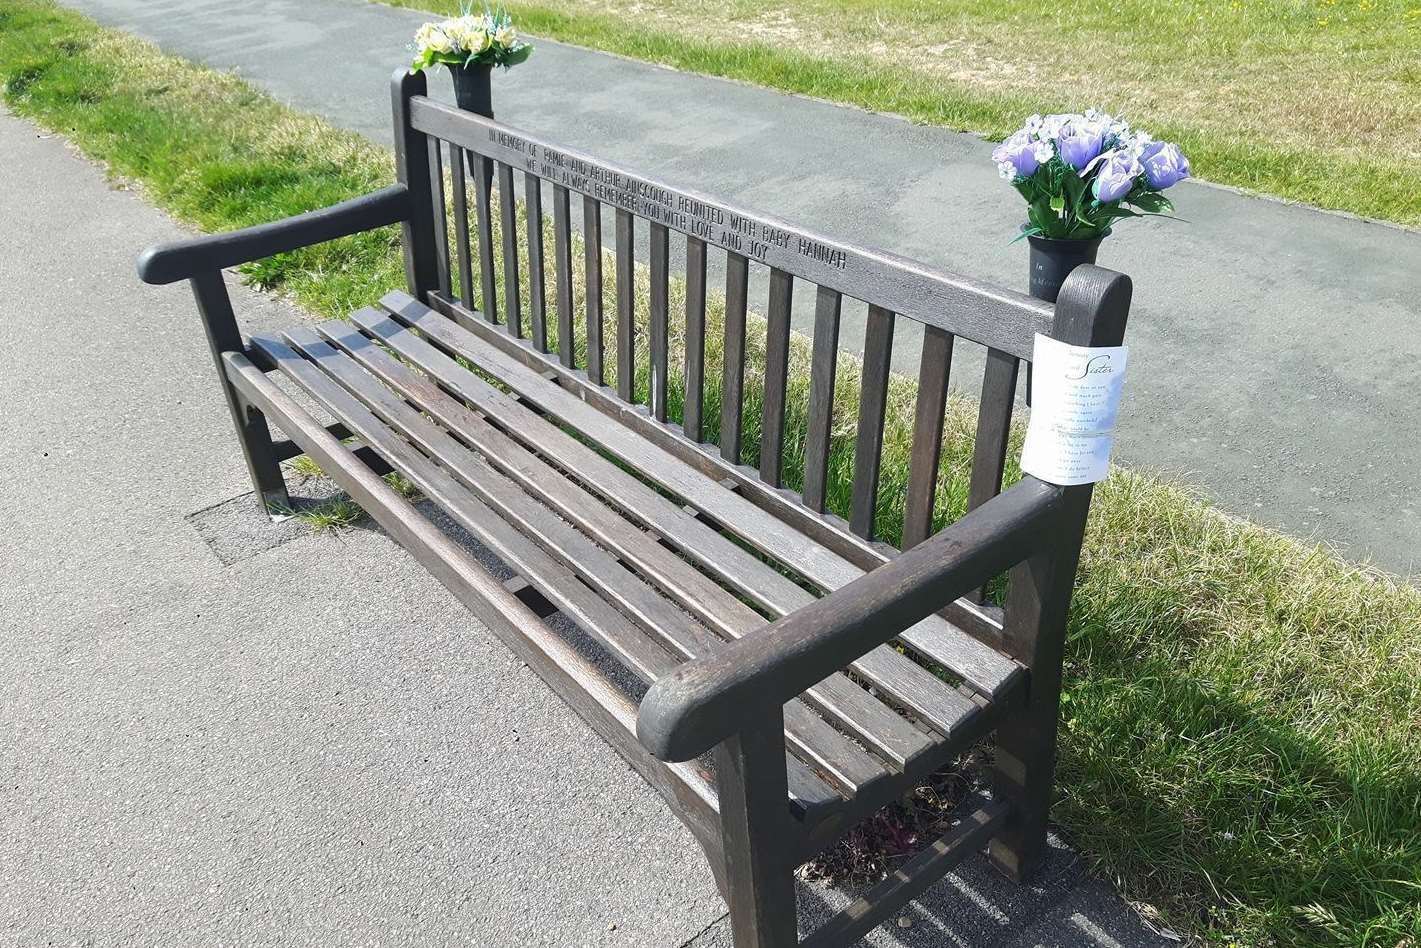 Dover District Council was going to stop families leaving flowers on benches like this one